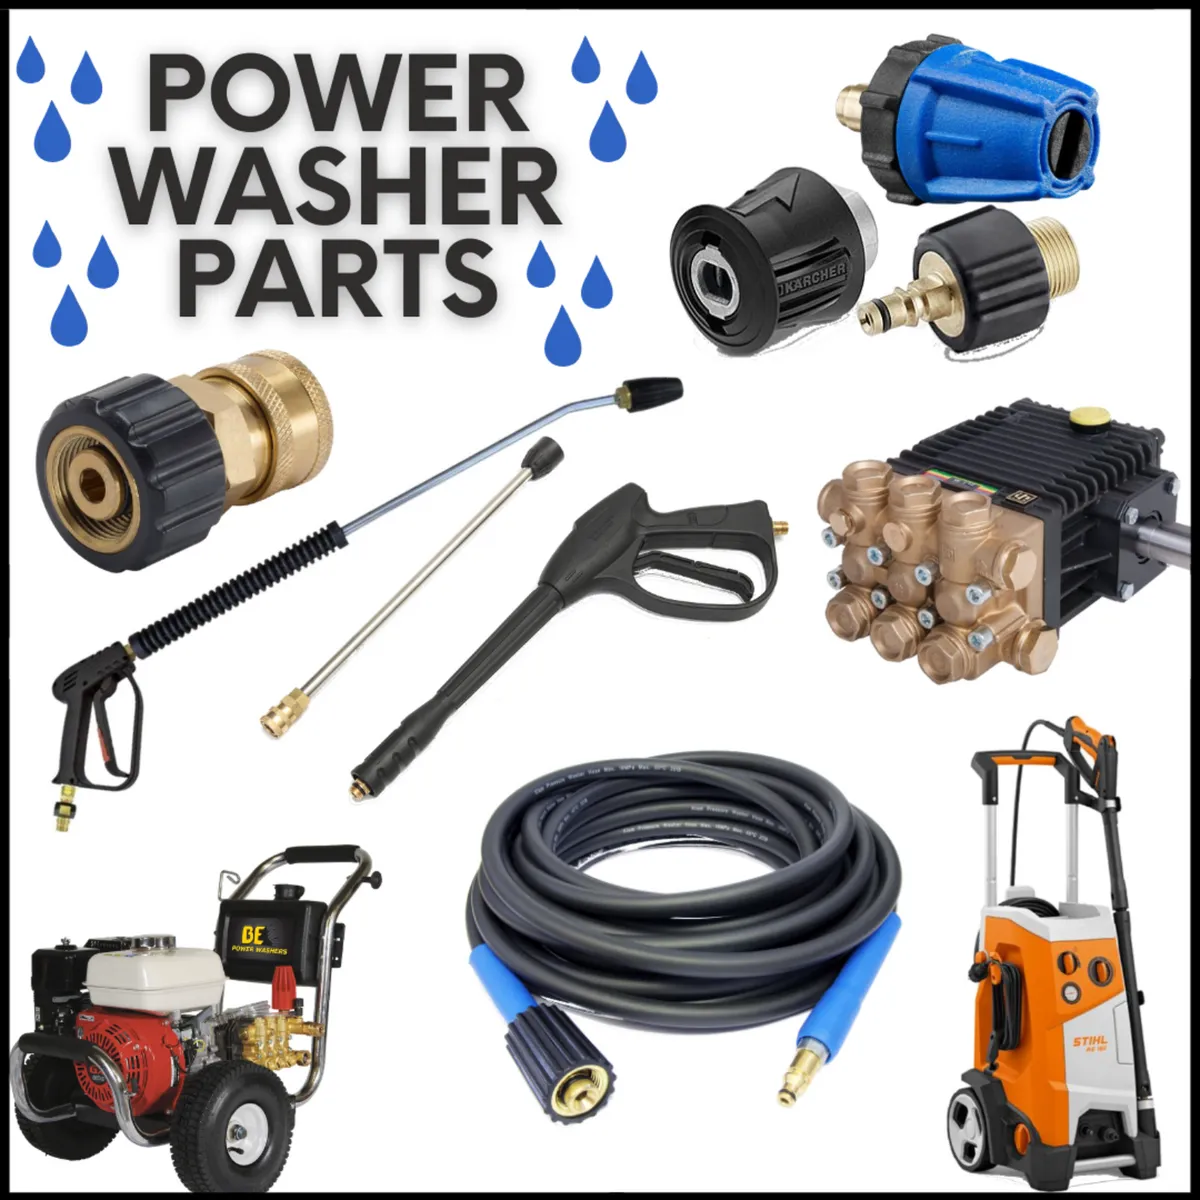 Power washer parts & Accessories - Image 1